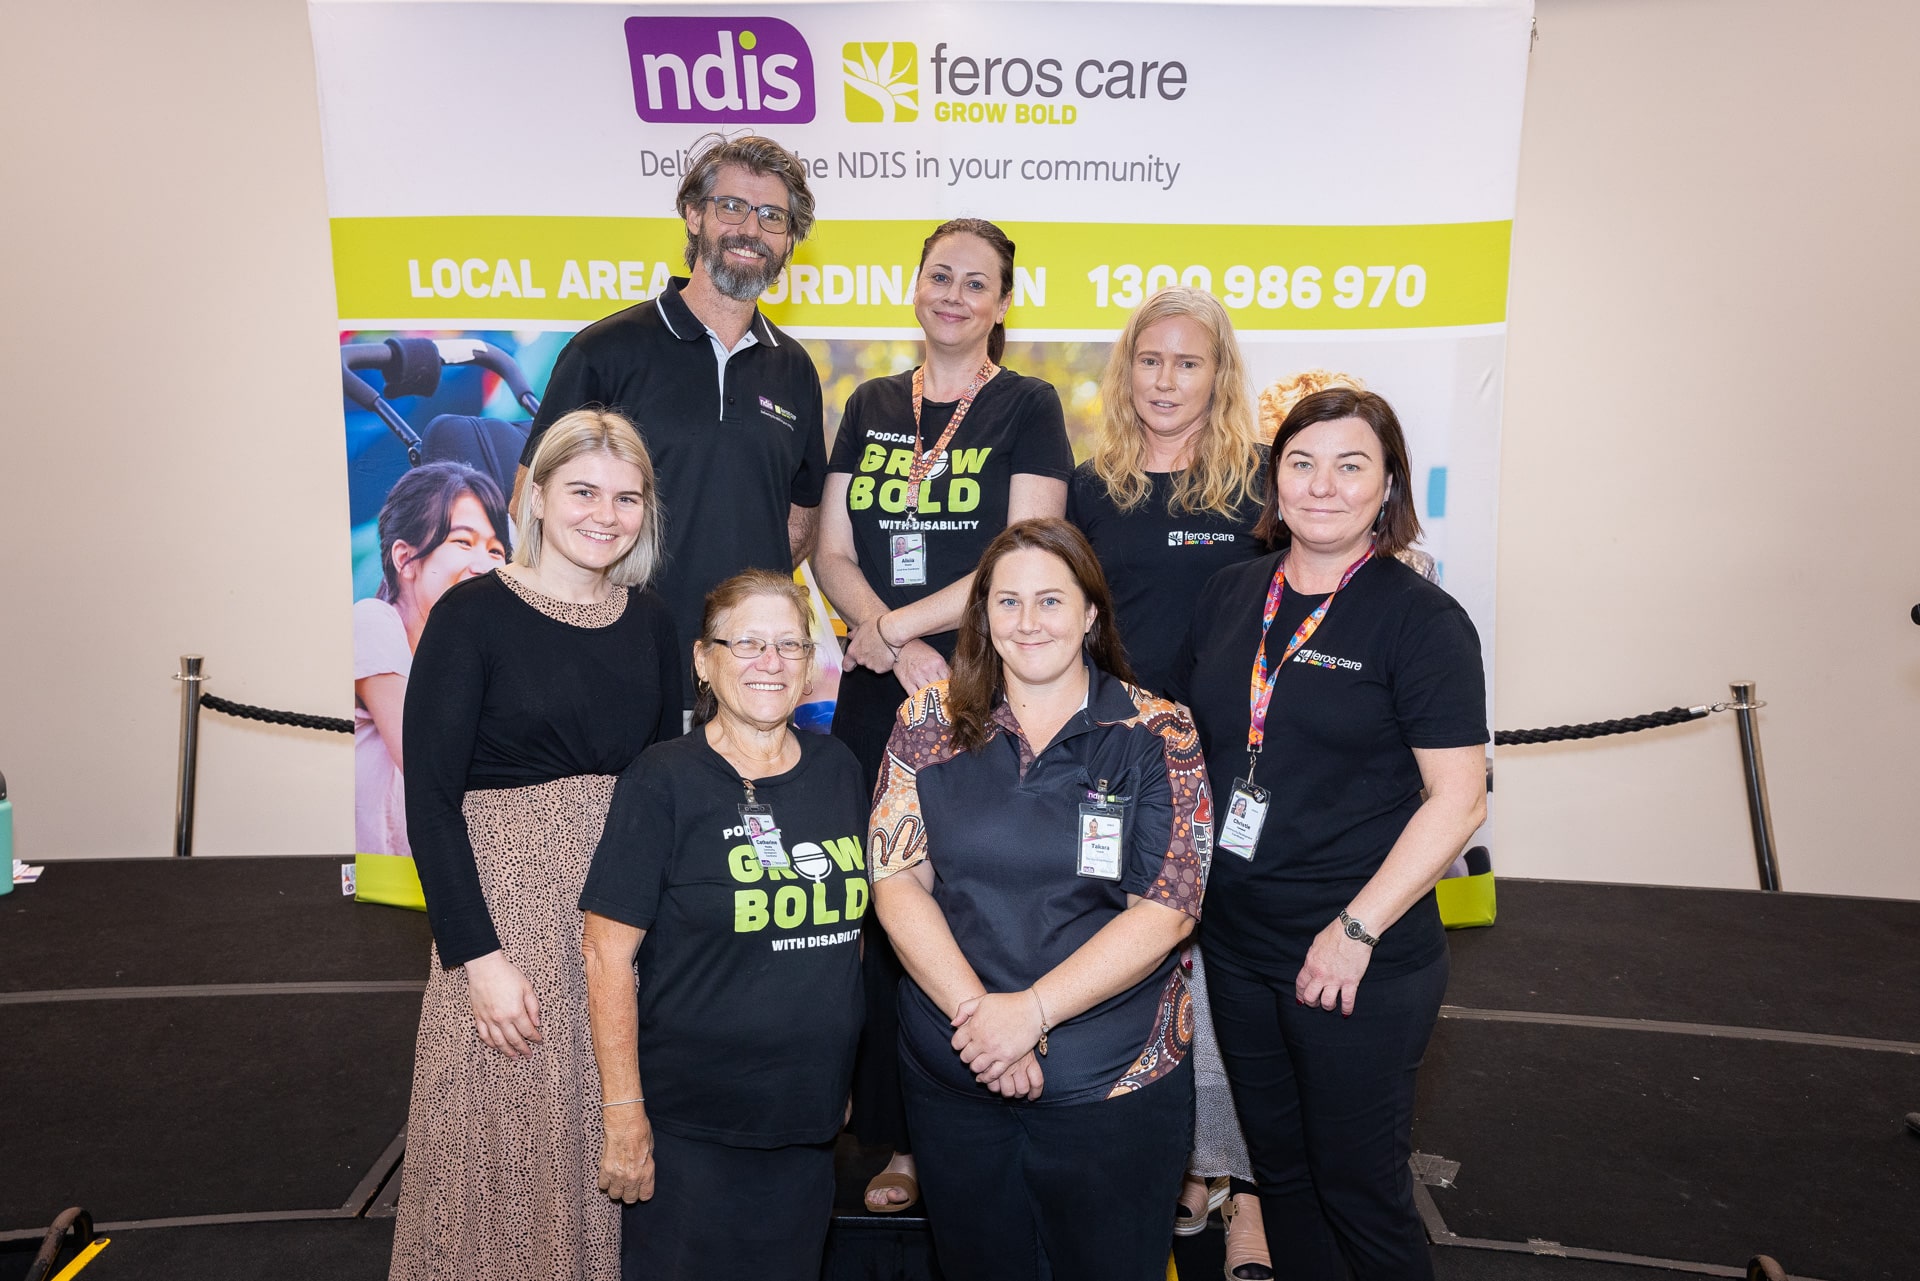 Seven people from Feros Care smiling to camera in front of Feros Care and NDIS banner